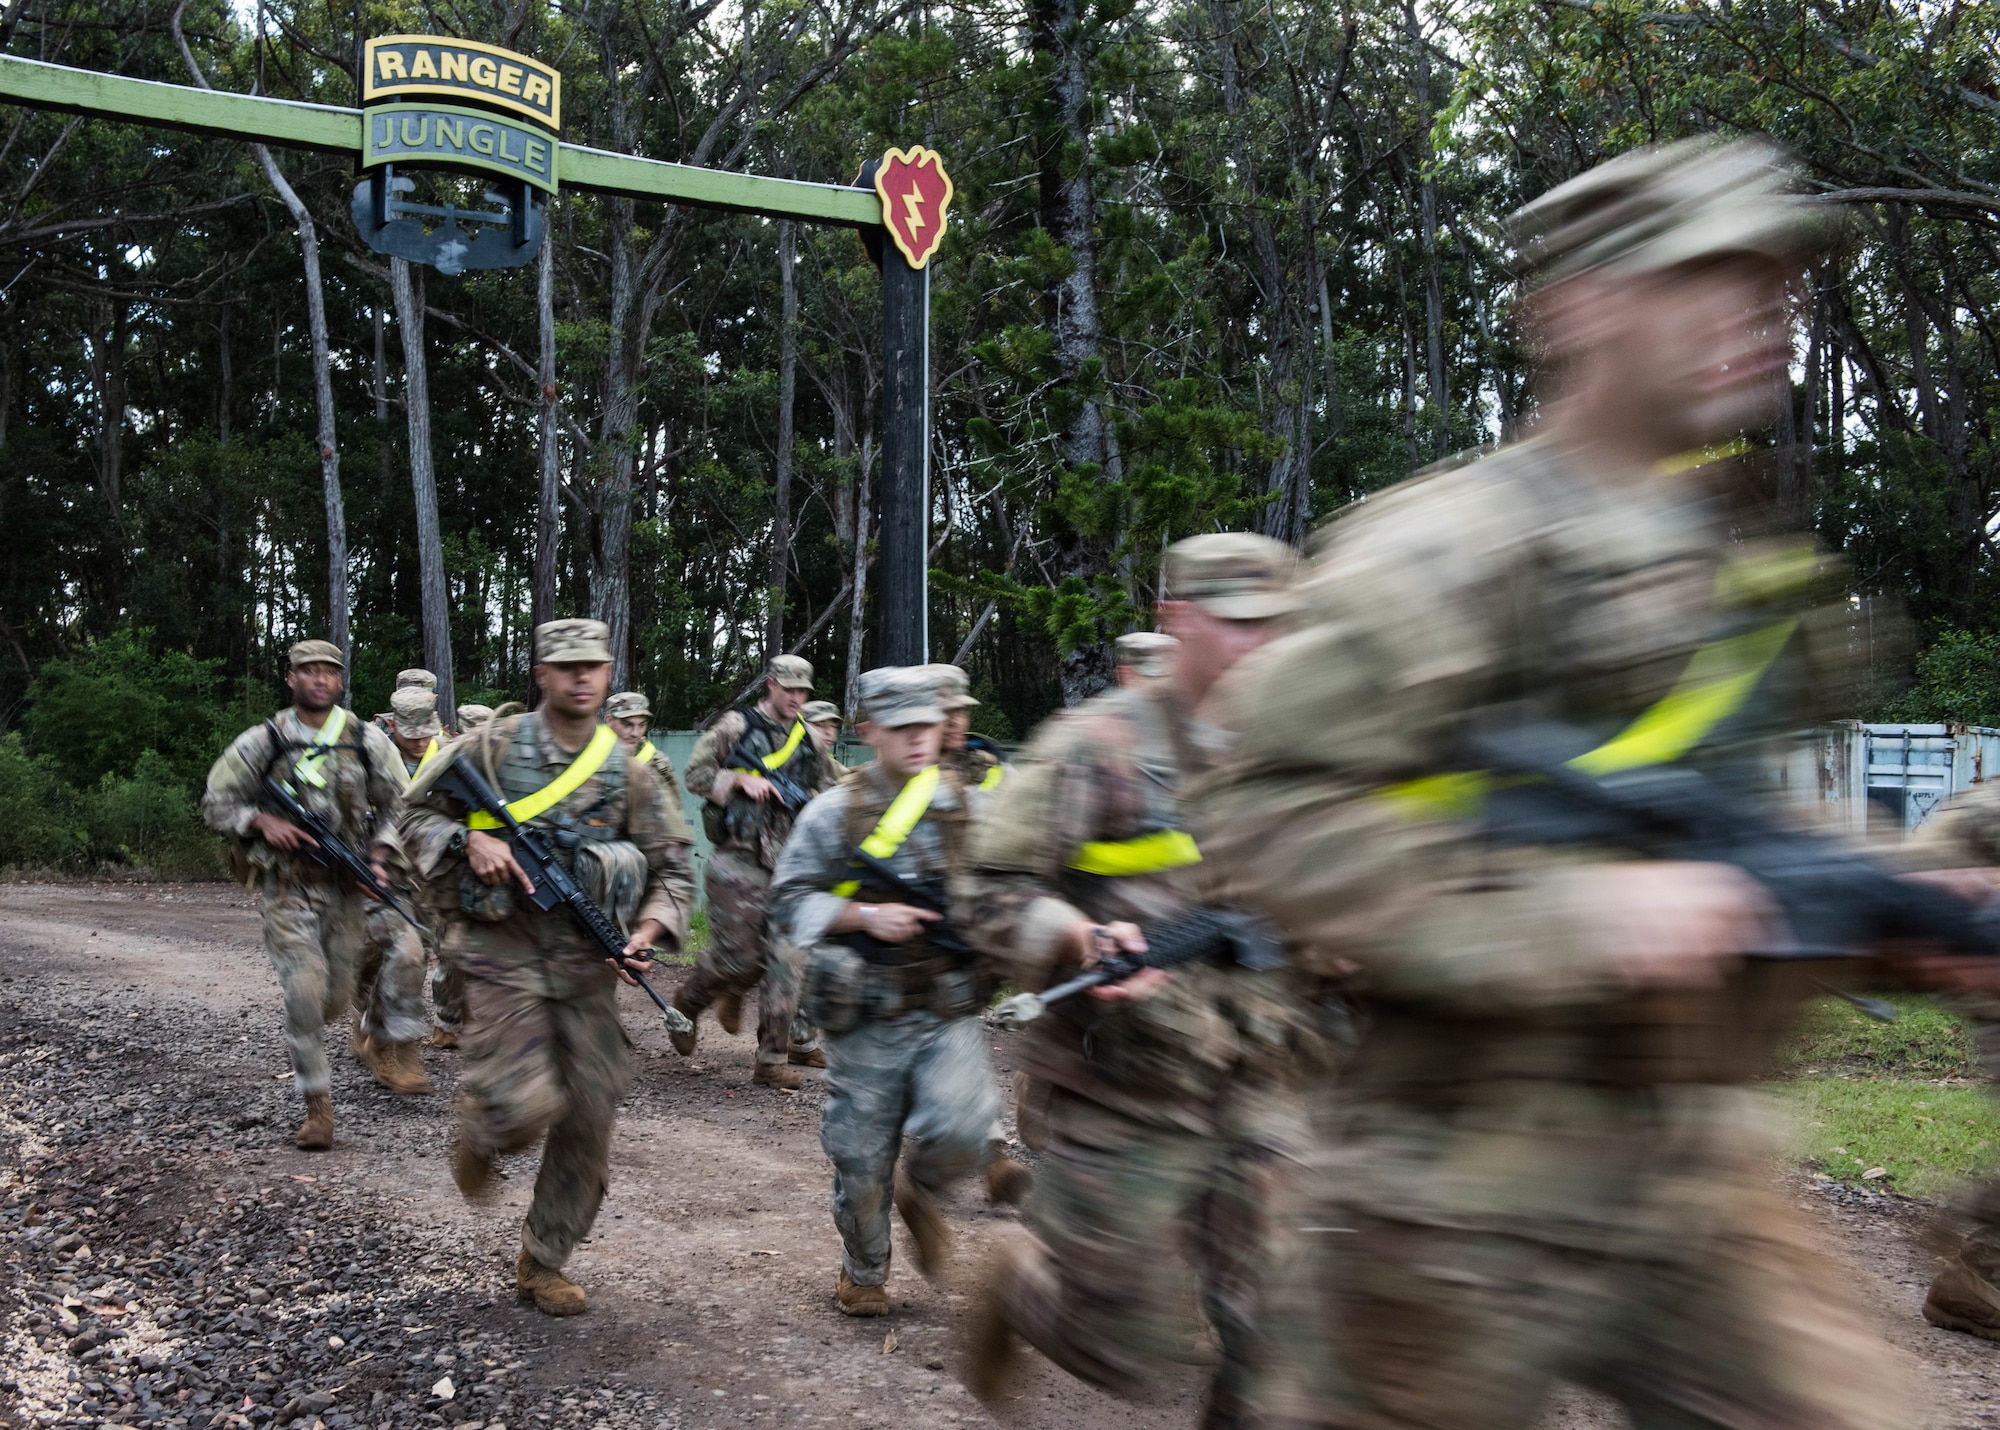 Airmen begin a two-mile run for a Ranger Assessment Course through the hills of a training camp near Schofield Barracks, Oahu, Hawaii, May 20, 2019. The purpose of the 19-day course is to prepare, assess and evaluate Air Force candidates for Army Ranger School. Of the 23 Airmen who began the Ranger Assessment Course, three dropped for personal motivational reasons and one dropped for medical reasons, leaving 19 standing at the end. Out of the 19, 11 Airmen met all the standards needed for a recommendation to go forward to Ranger School. (U.S. Air Force photo by Staff Sgt. Hailey Haux)